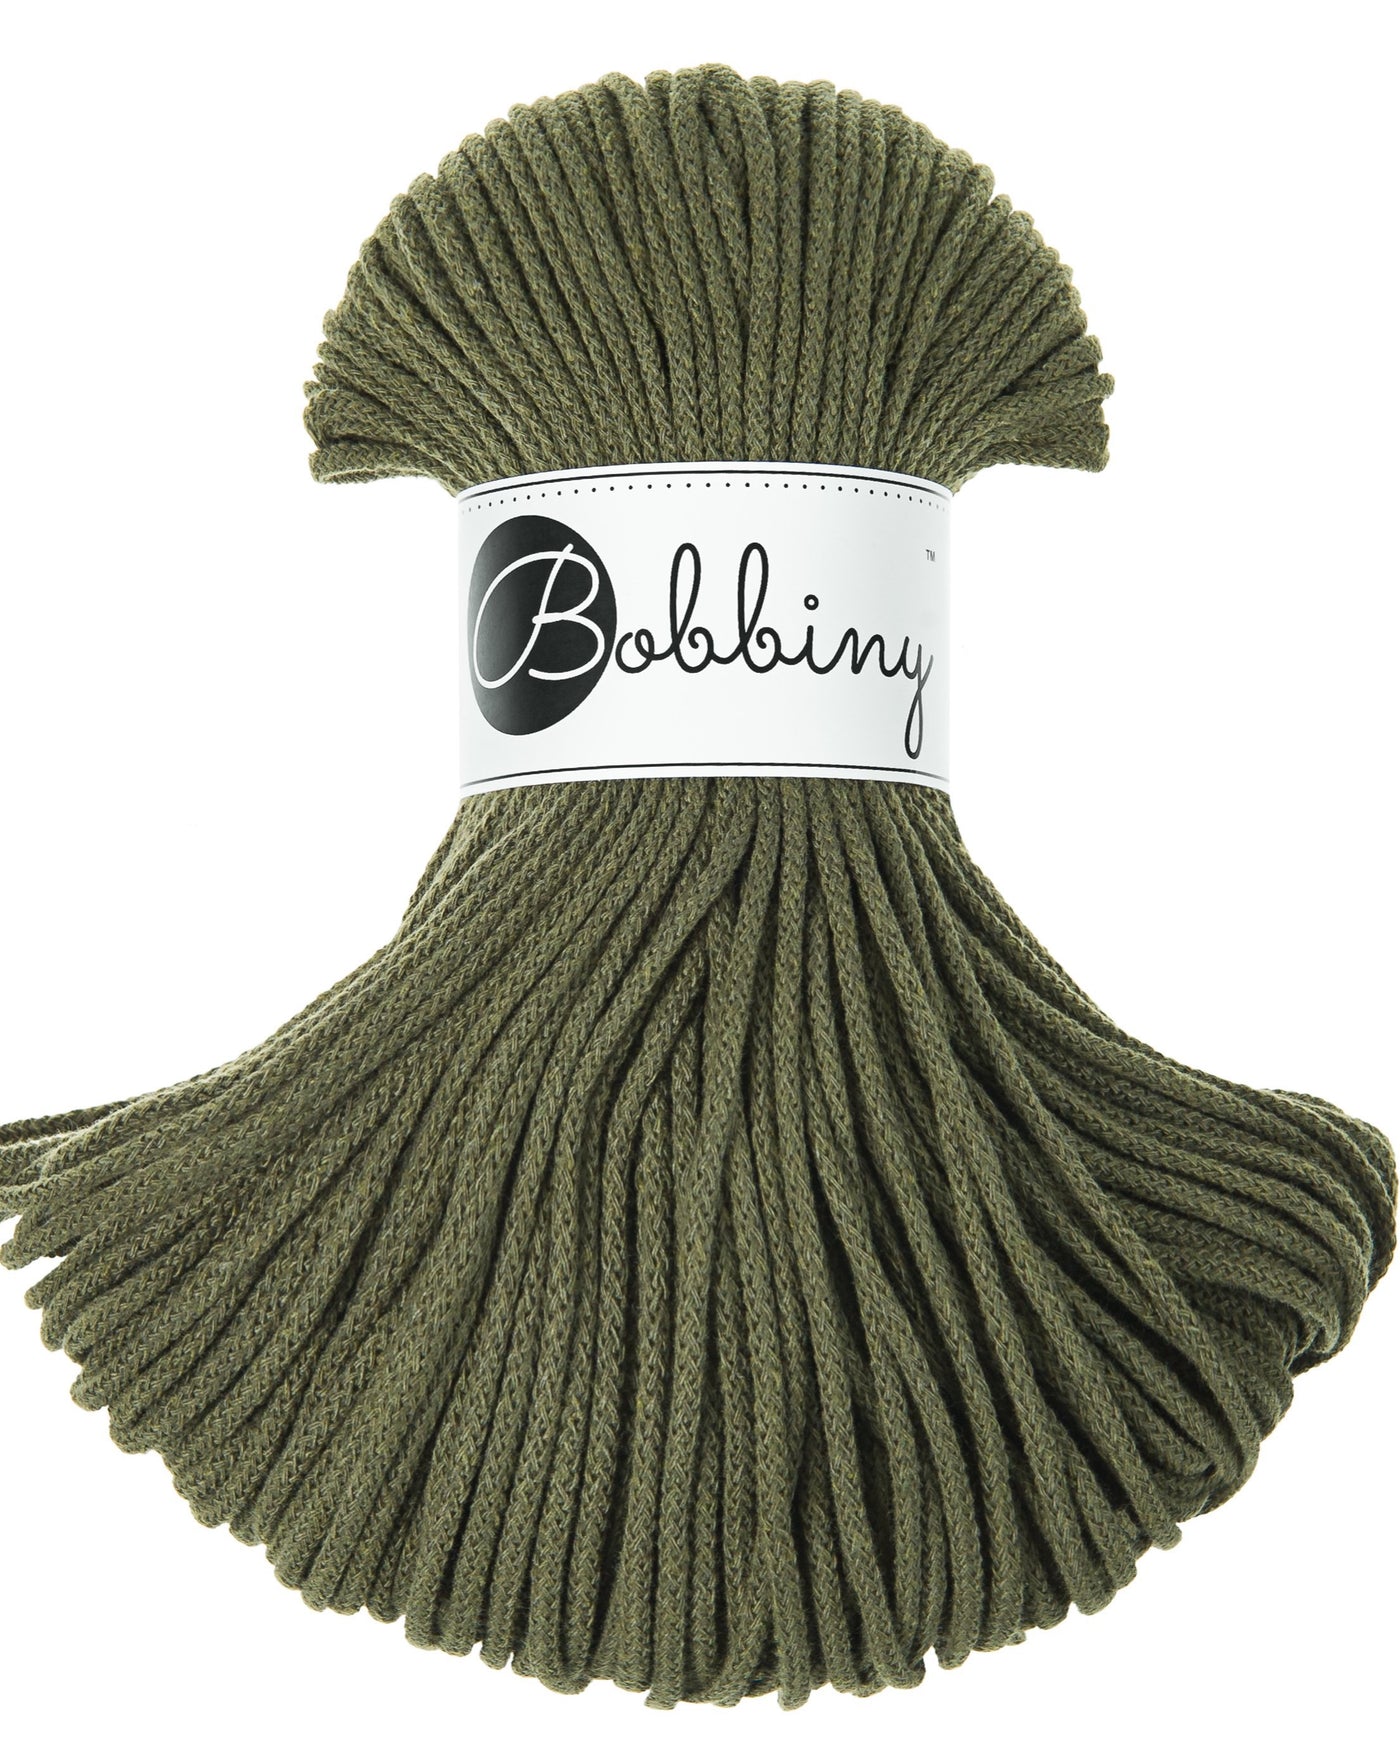 These beautiful Bobbiny cords are made in Poland from 100% recycled cottons and are non-toxic, certified safe for children and meet certified worldwide textile standards.  3mm Diameter  100 metres Length  Recommended for use with 8-10mm crochet or knitting needles.  Cotton inner and outer layers, perfect for use with Macrame, Crochet or Knitting.